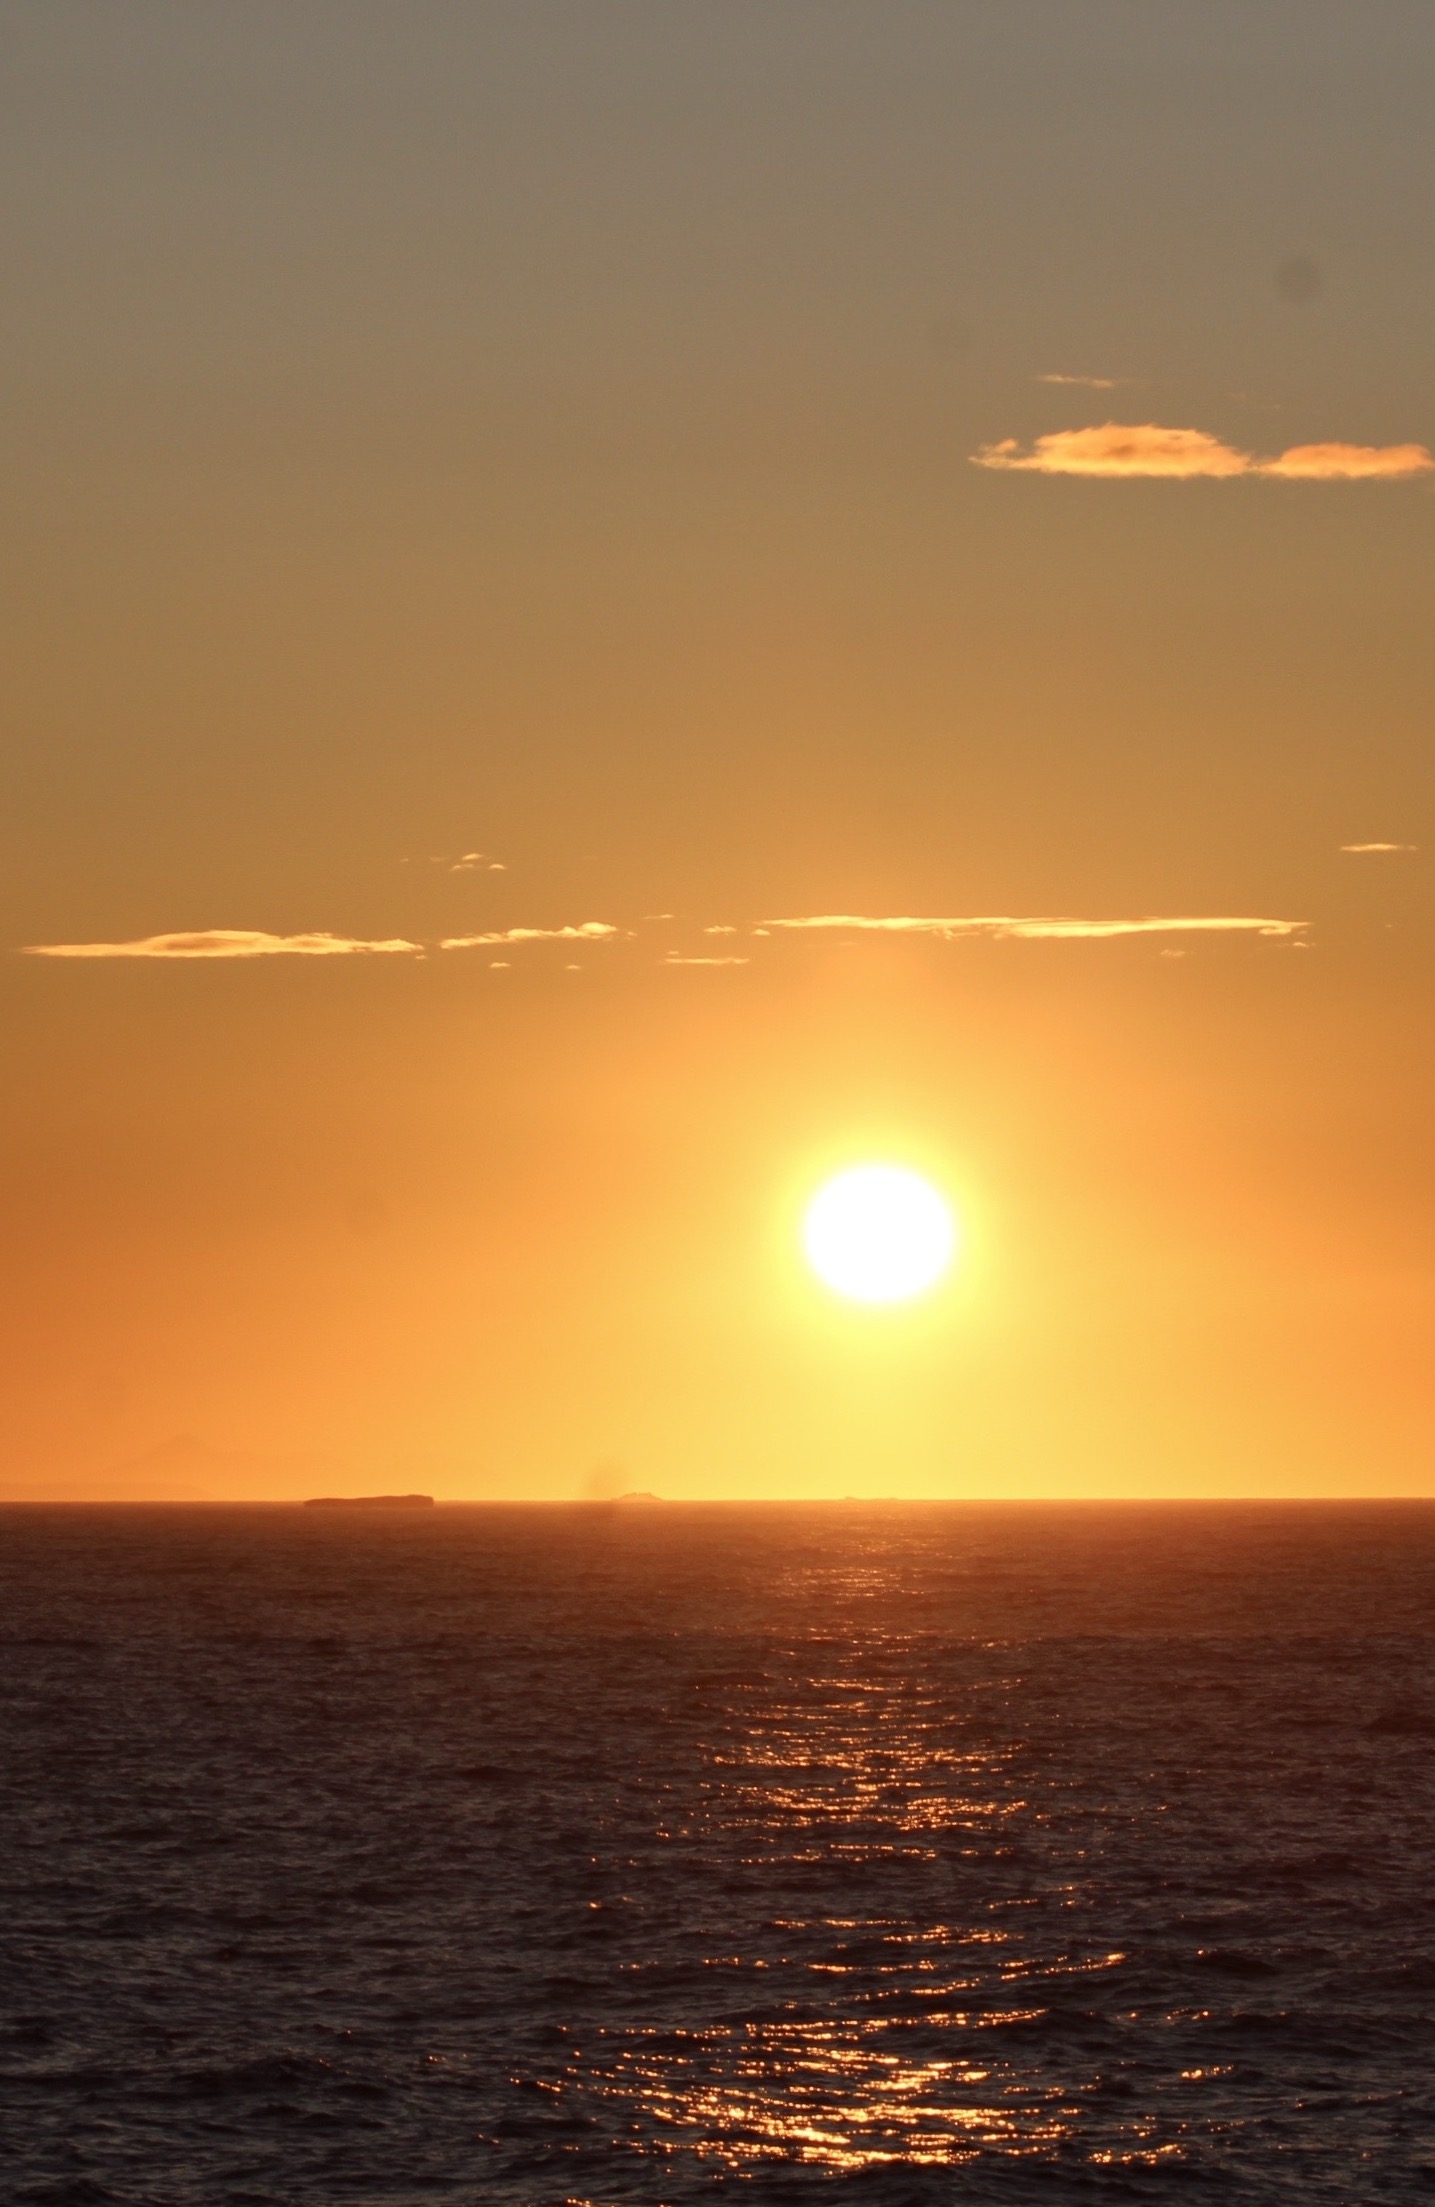 Sunset in Antarctica from Helideck on Bio Hesperides. Feb. 26, 2020